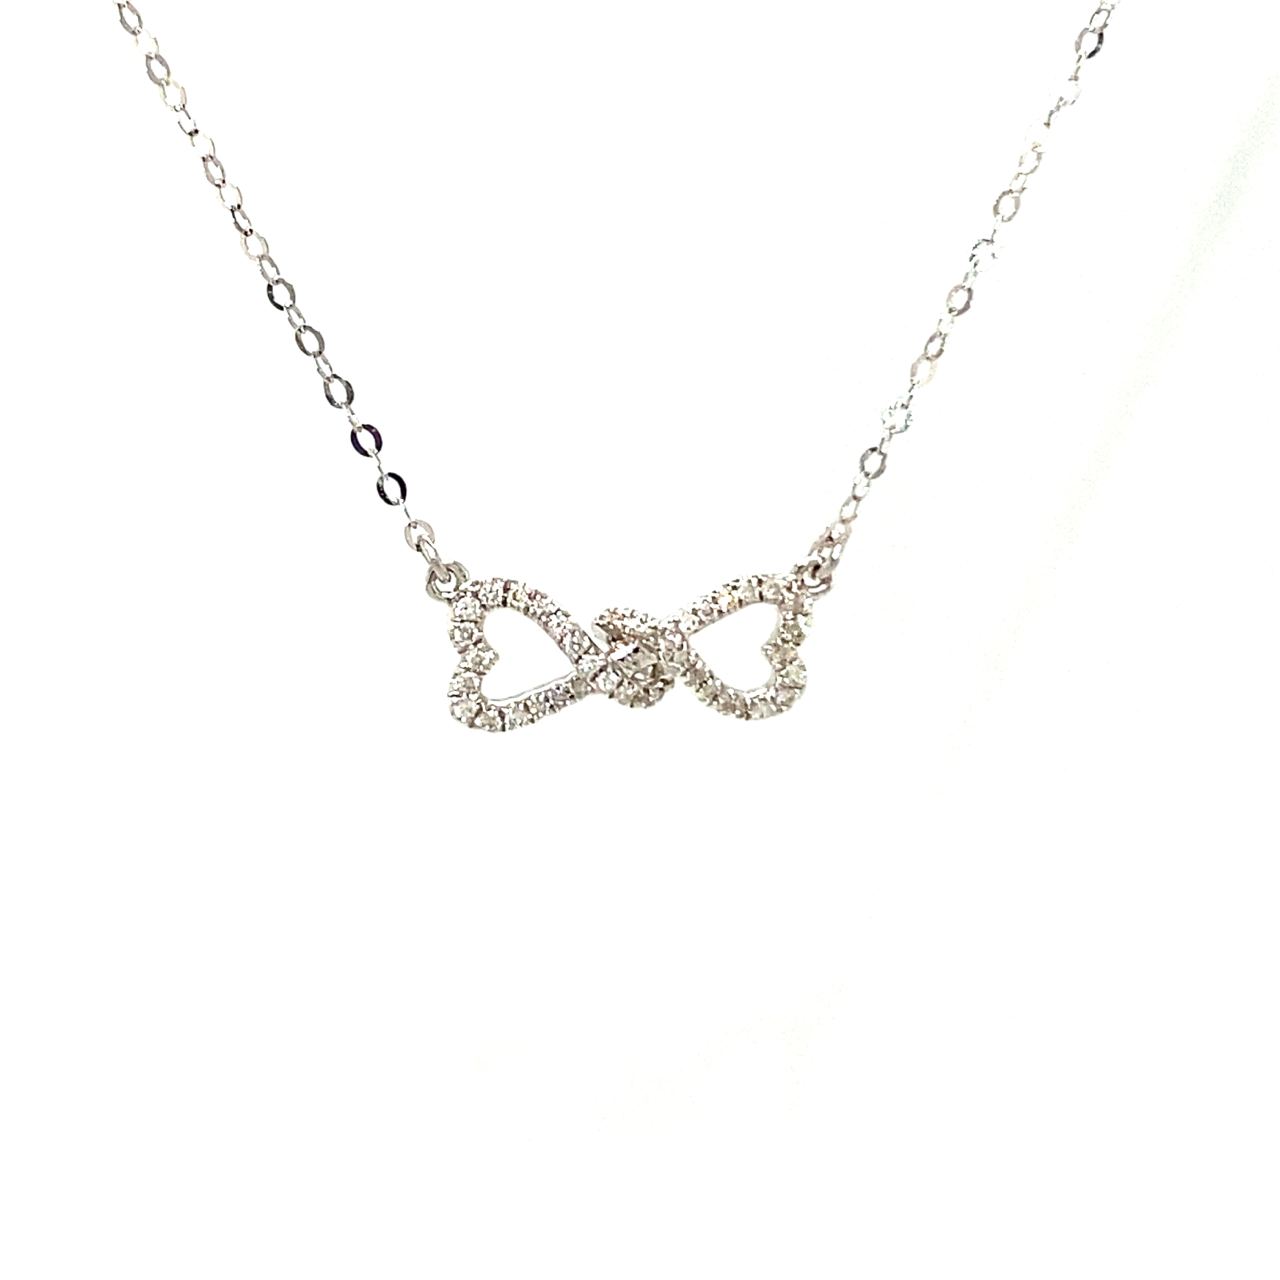 18K White Gold Twisted Bow Diamond Necklace